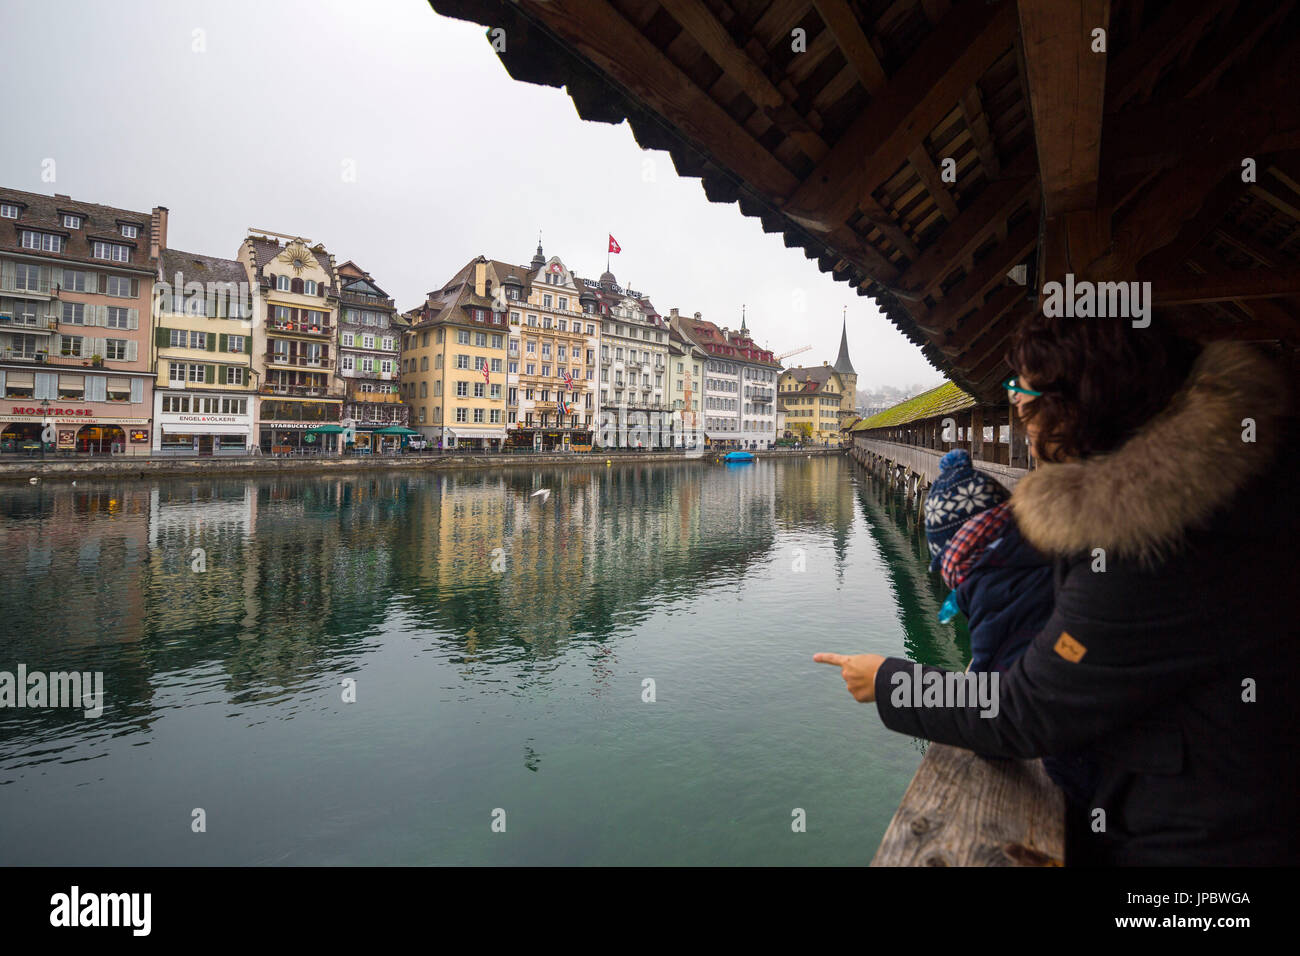 Tourists on Chapel Bridge admire the typical buildings of the old town on river Reuss Rathausquai Lucerne Switzerland Europe Stock Photo